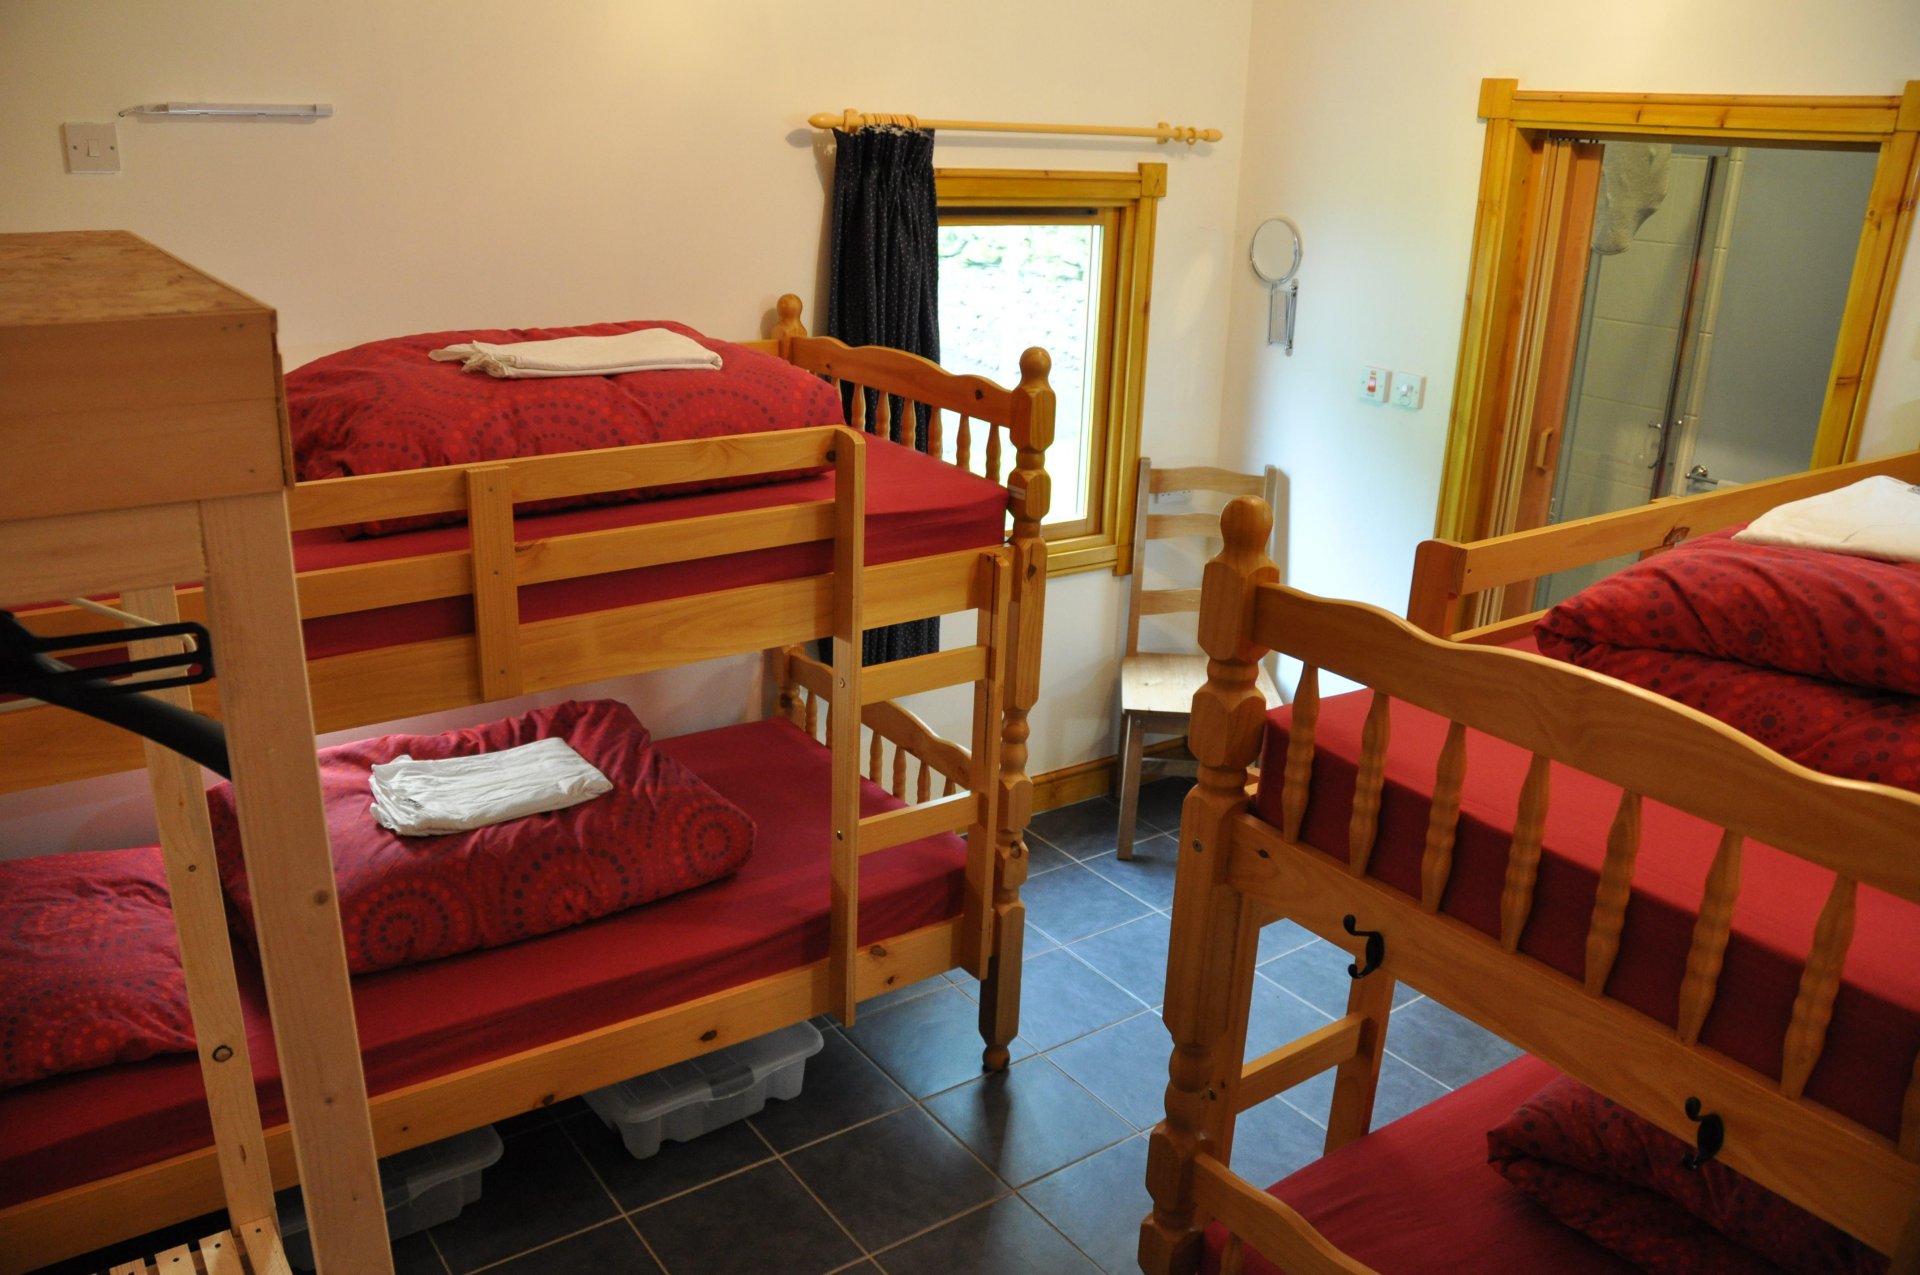 One of the two bedrooms in the Bunkhouse